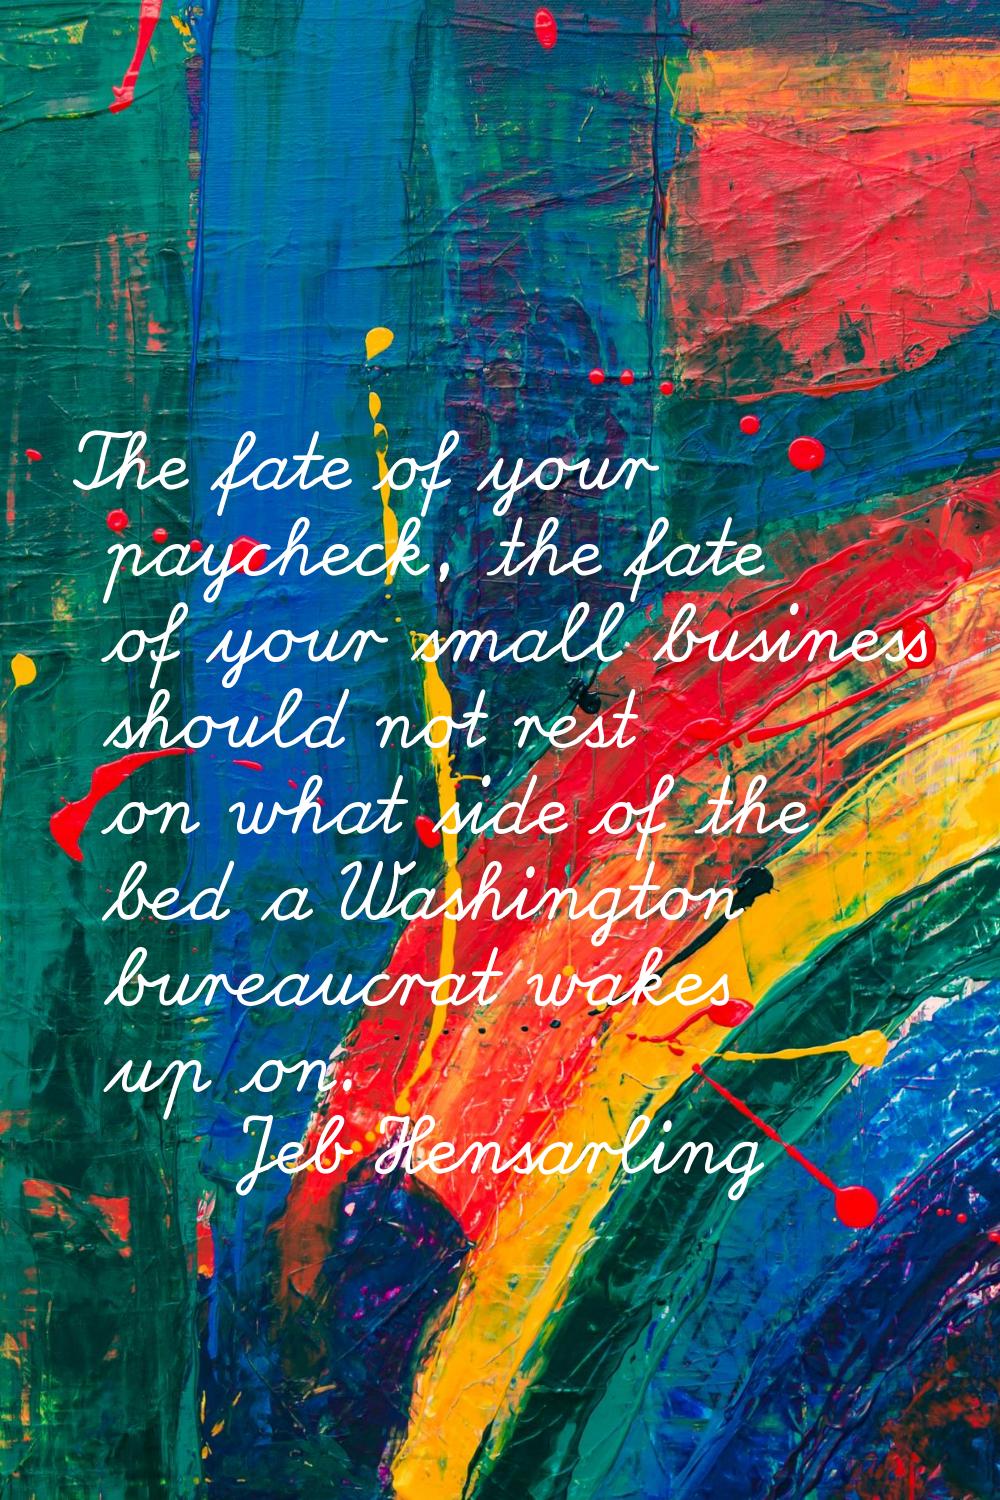 The fate of your paycheck, the fate of your small business should not rest on what side of the bed 